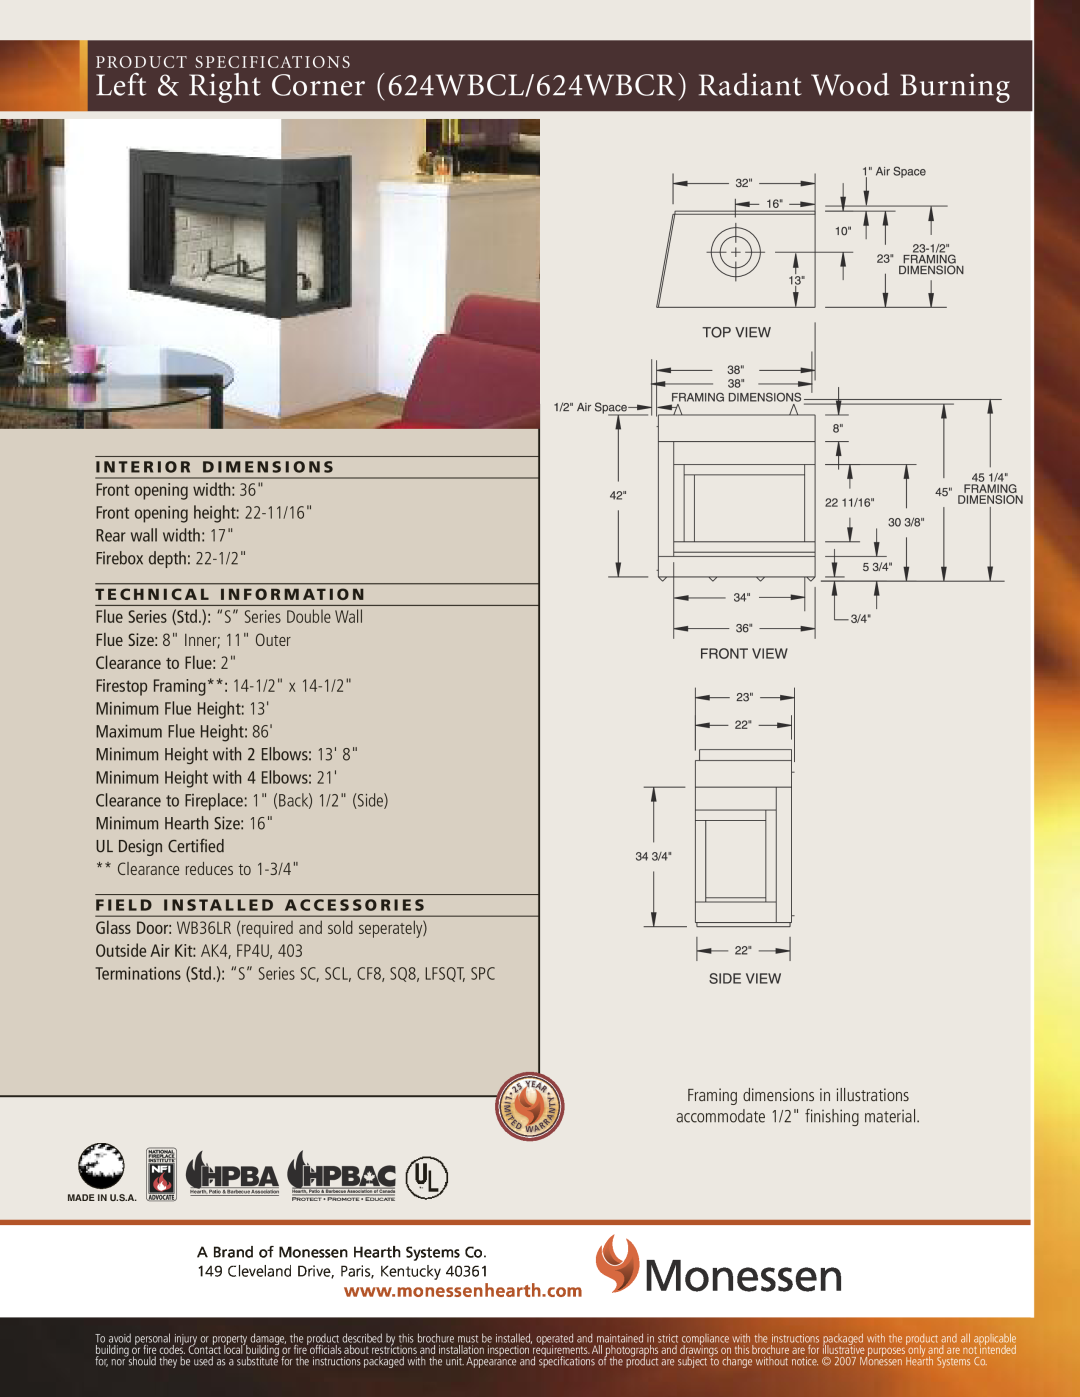 Monessen Hearth BWBC400A Flue Series Std. “S” Series Double Wall, Glass Door WB36LR required and sold seperately, Hpba 